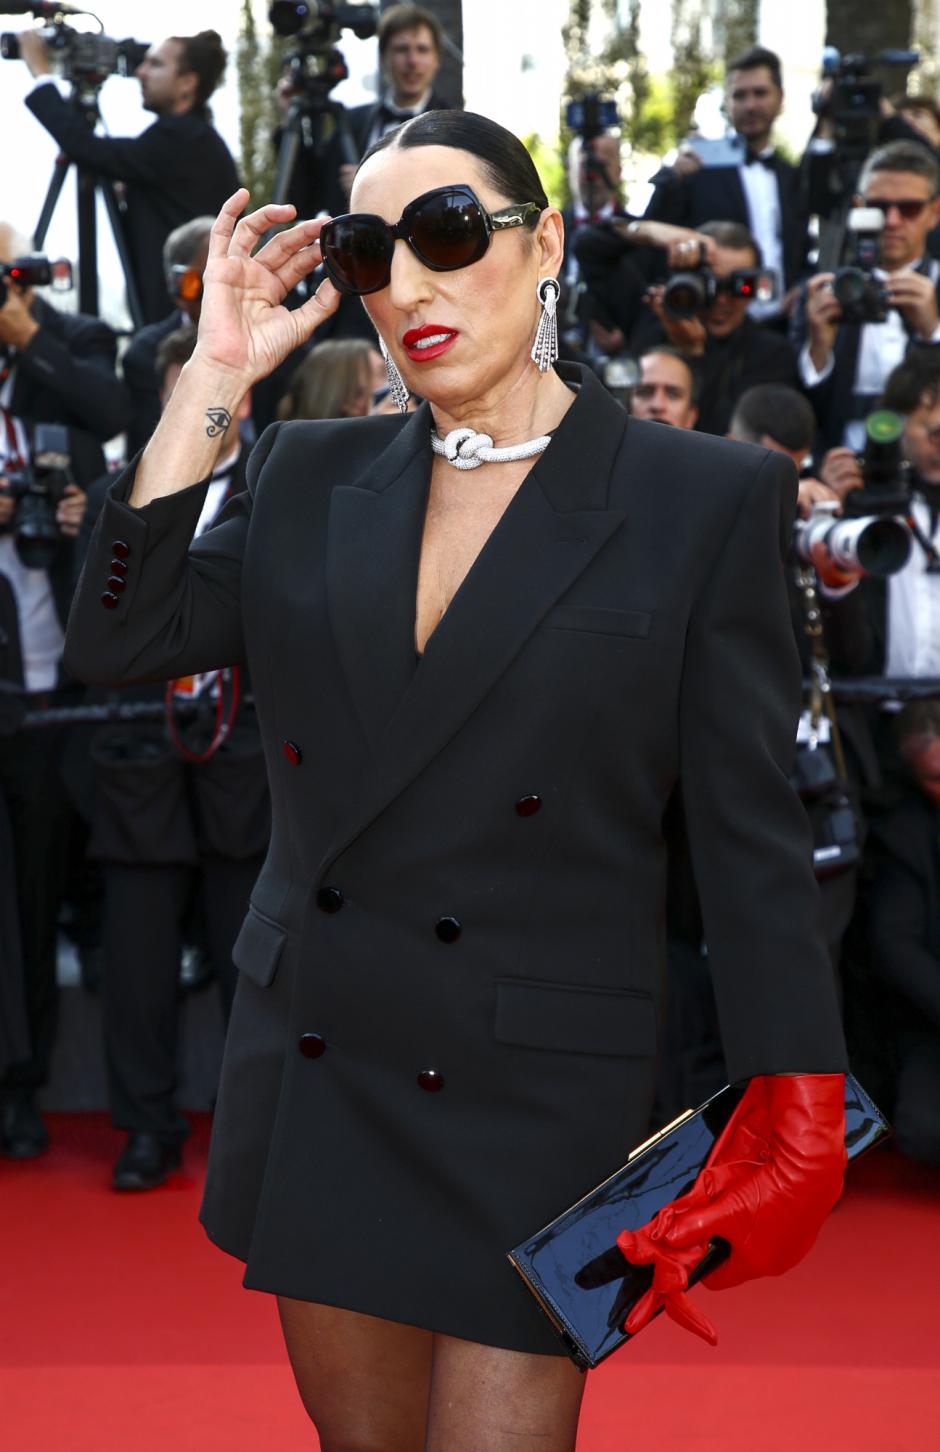 Actress Rossy de Palma at the opening ceremony and the premiere of the film 'Final Cut' at the 75th international film festival, Cannes, southern France, Tuesday, May 17, 2021.